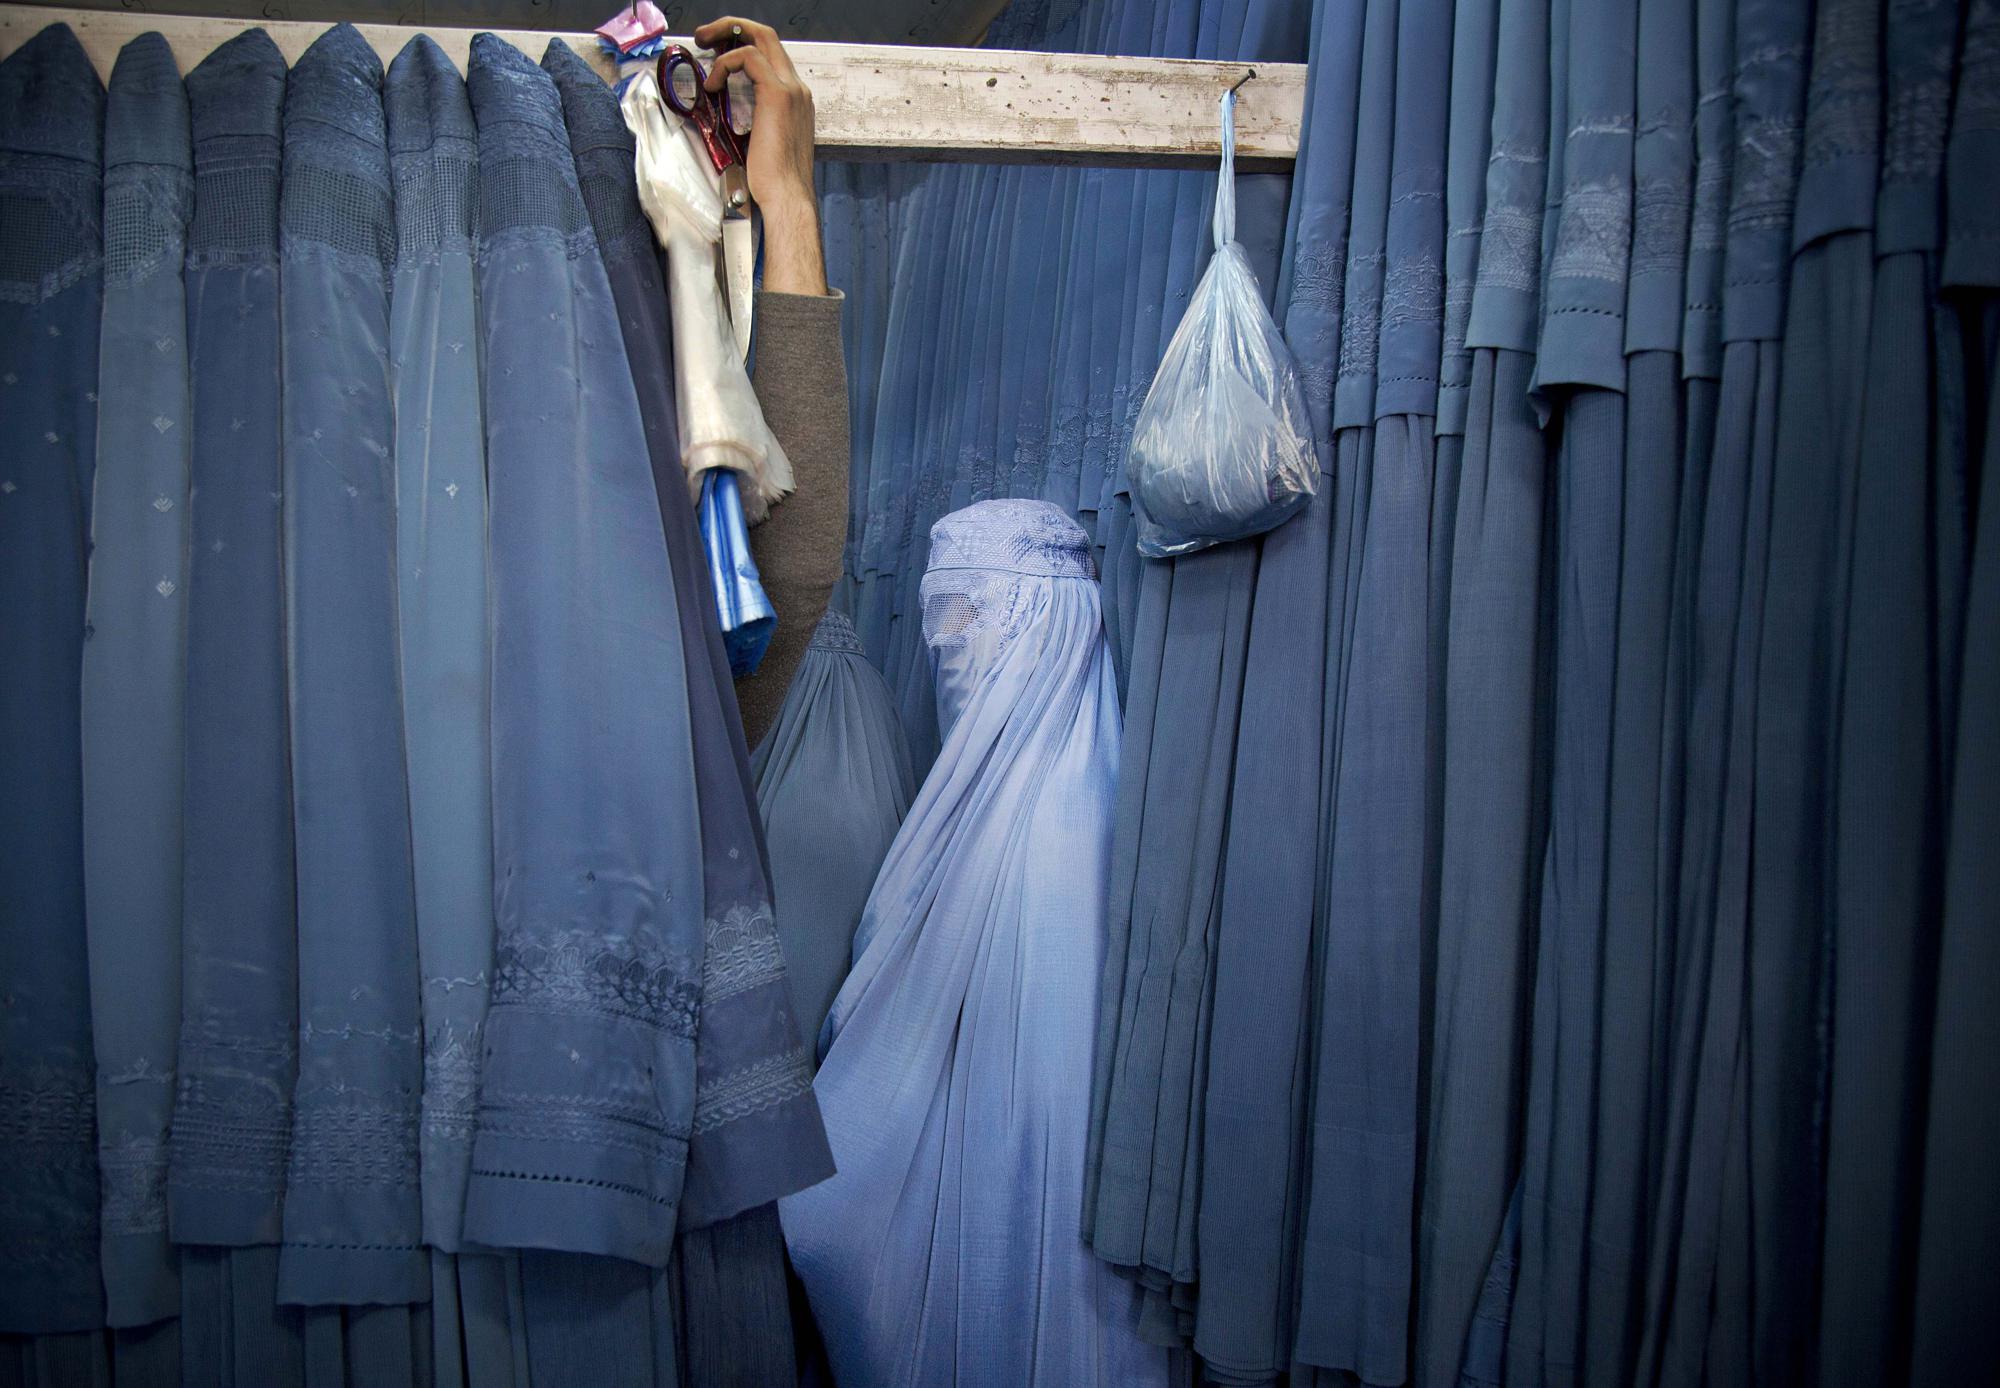 An Afghan woman waits in a changing room to try out a new Burqa, in a shop in the old city of Kabul, Afghanistan, Thursday, April 11, 2013. Before the Taliban took power in Afghanistan, the Burqa was infrequently worn in cities. While they were in power, the Taliban required the wearing of a Burqa in public. (AP Photo/Anja Niedringhaus)